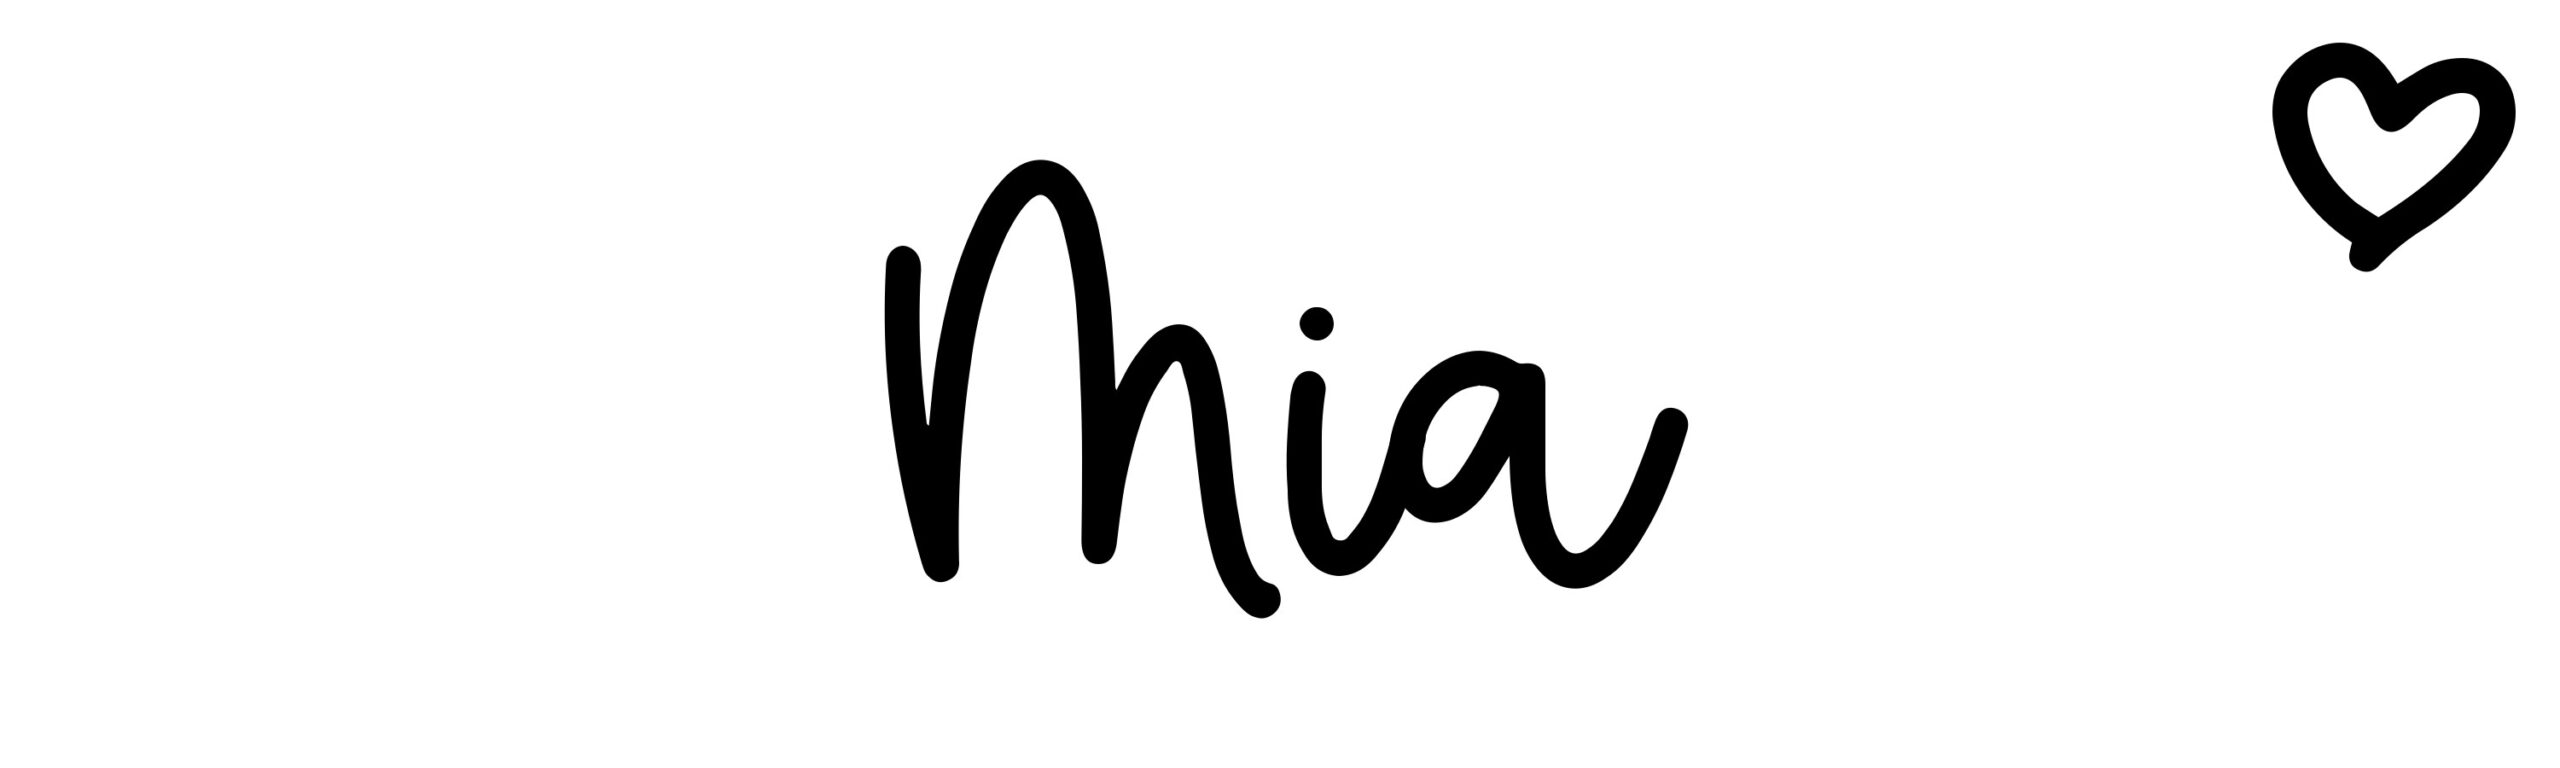 Mia - Name meaning, origin, variations and more